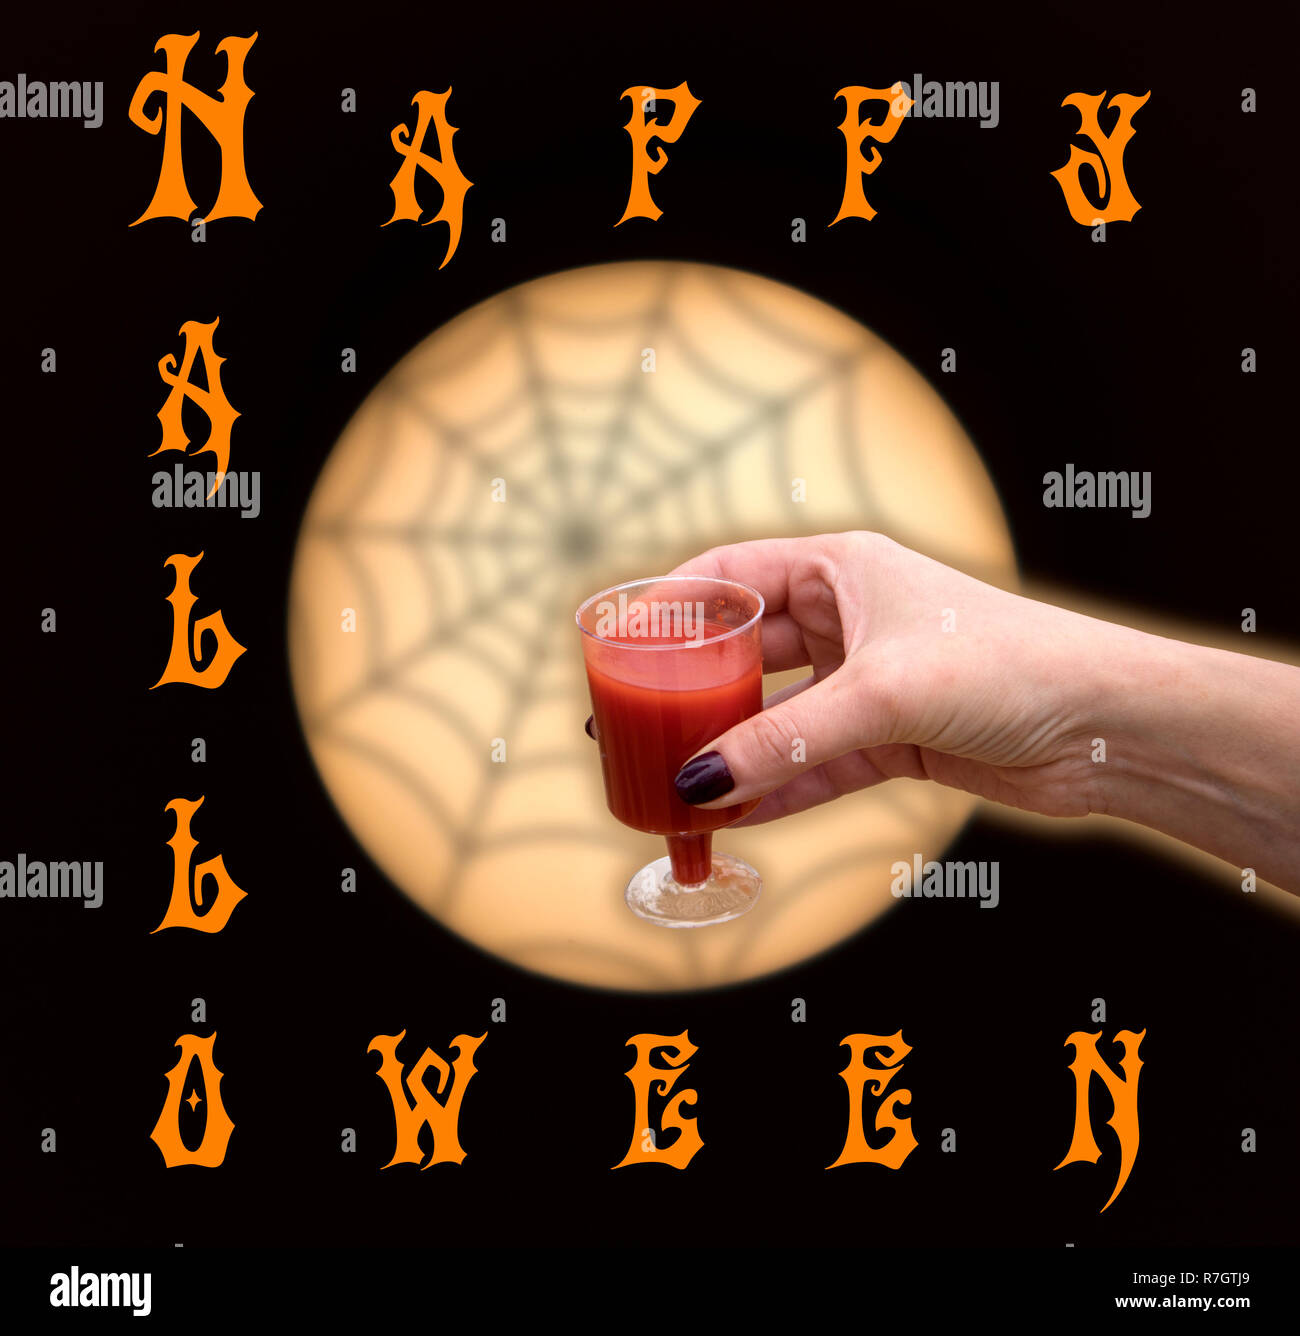 Halloween greeting card or banner, woman hand with glass of red liquid against moony circle and spider web Stock Photo